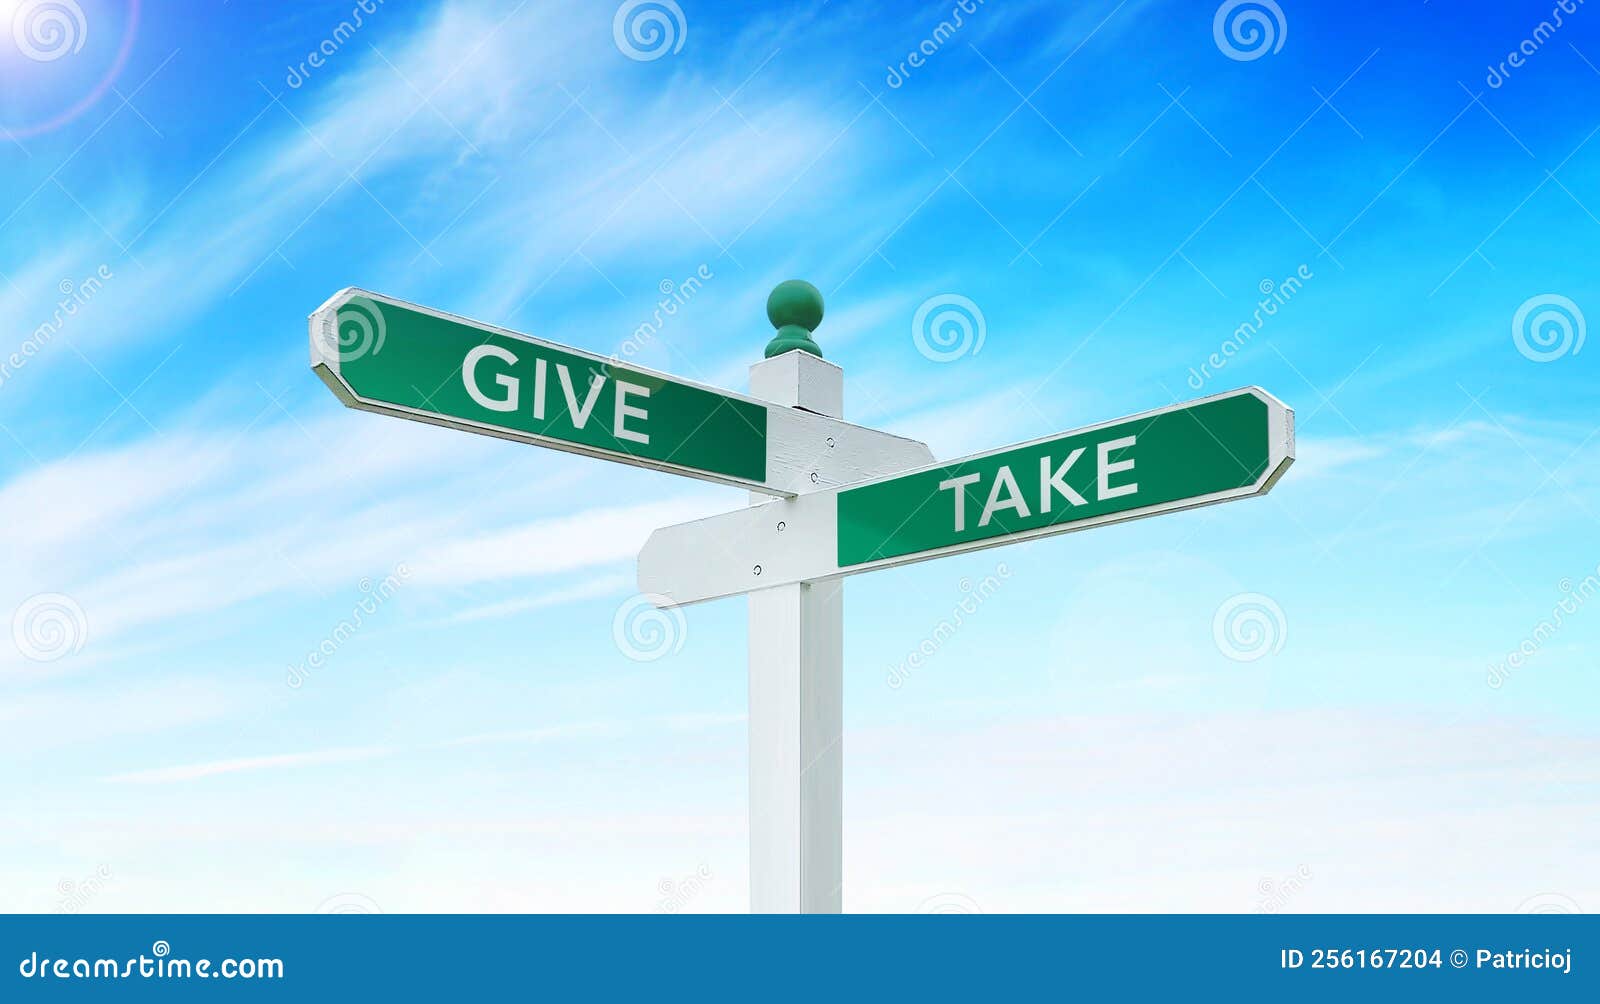 3d Road Sign Saying Please Donate Stock Illustration - Download